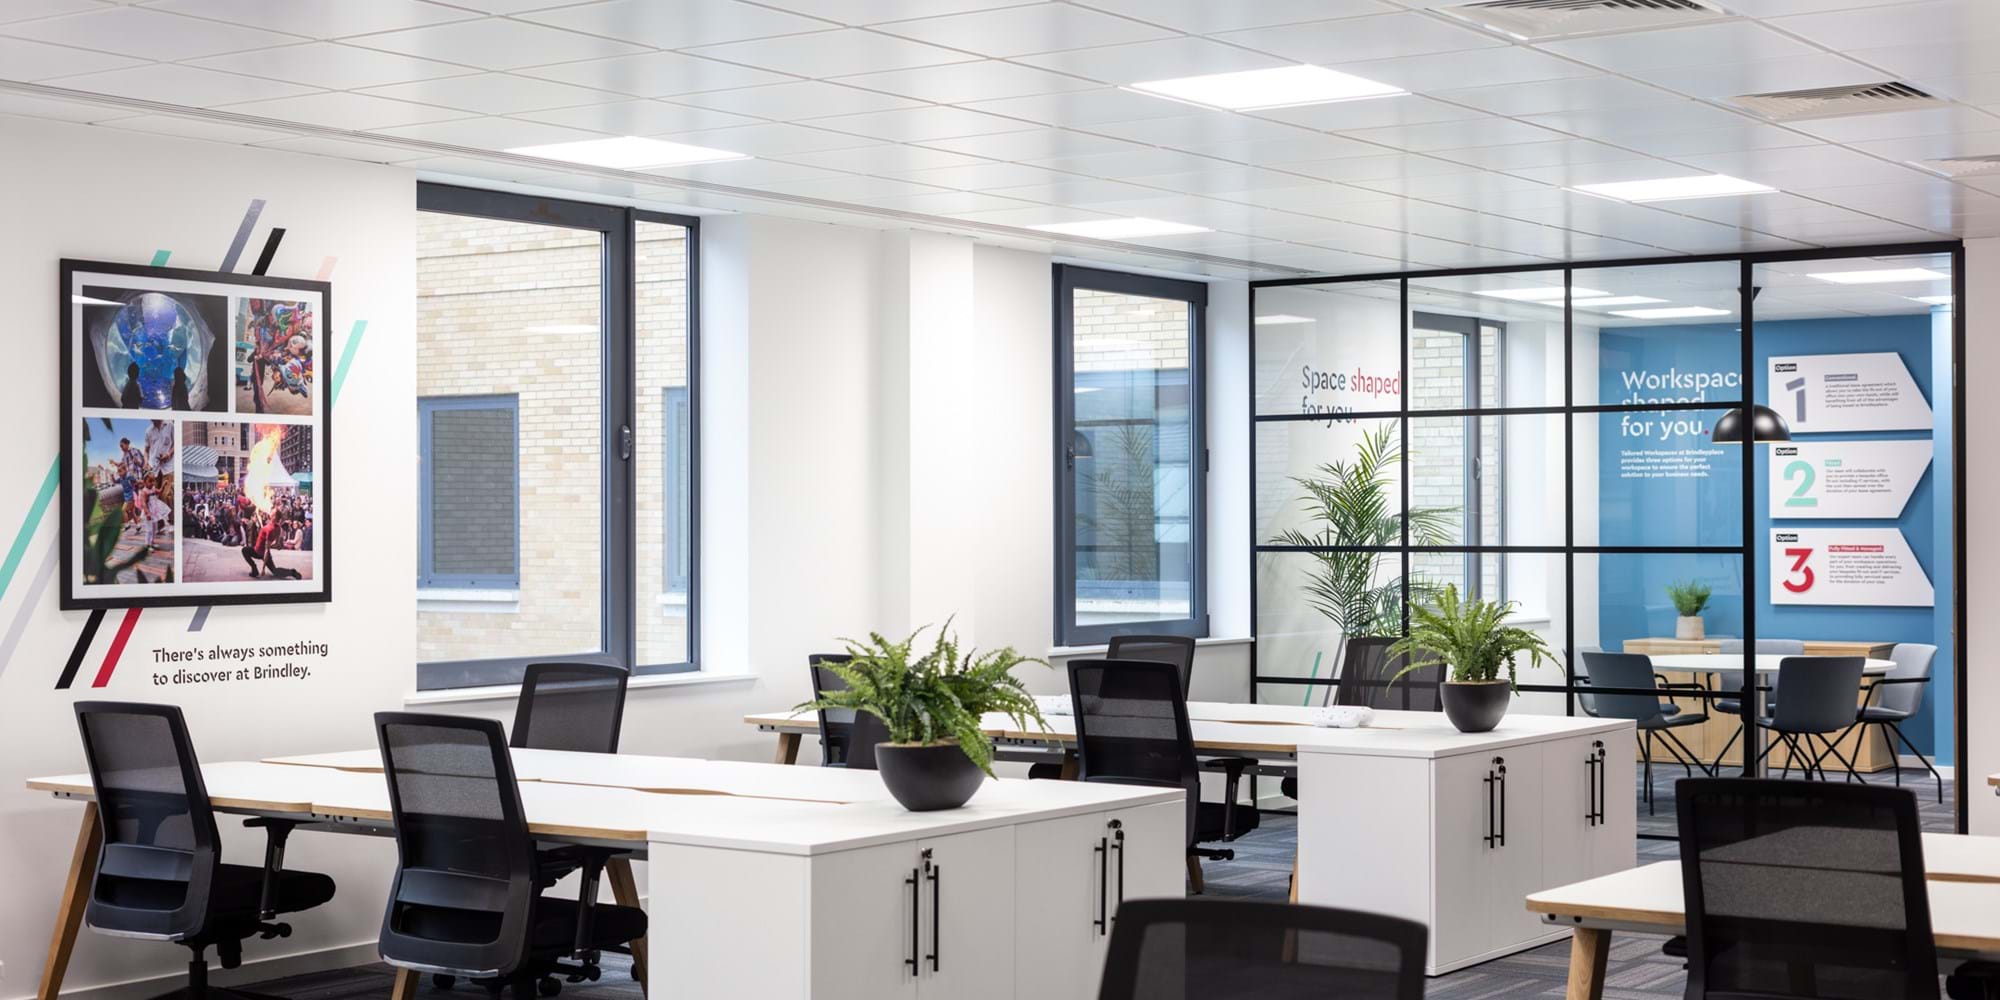 Modus Workspace office design, fit out and refurbishment - Pivot - Brindley Place - Pivot_9_BrindleyPlace-9.jpg